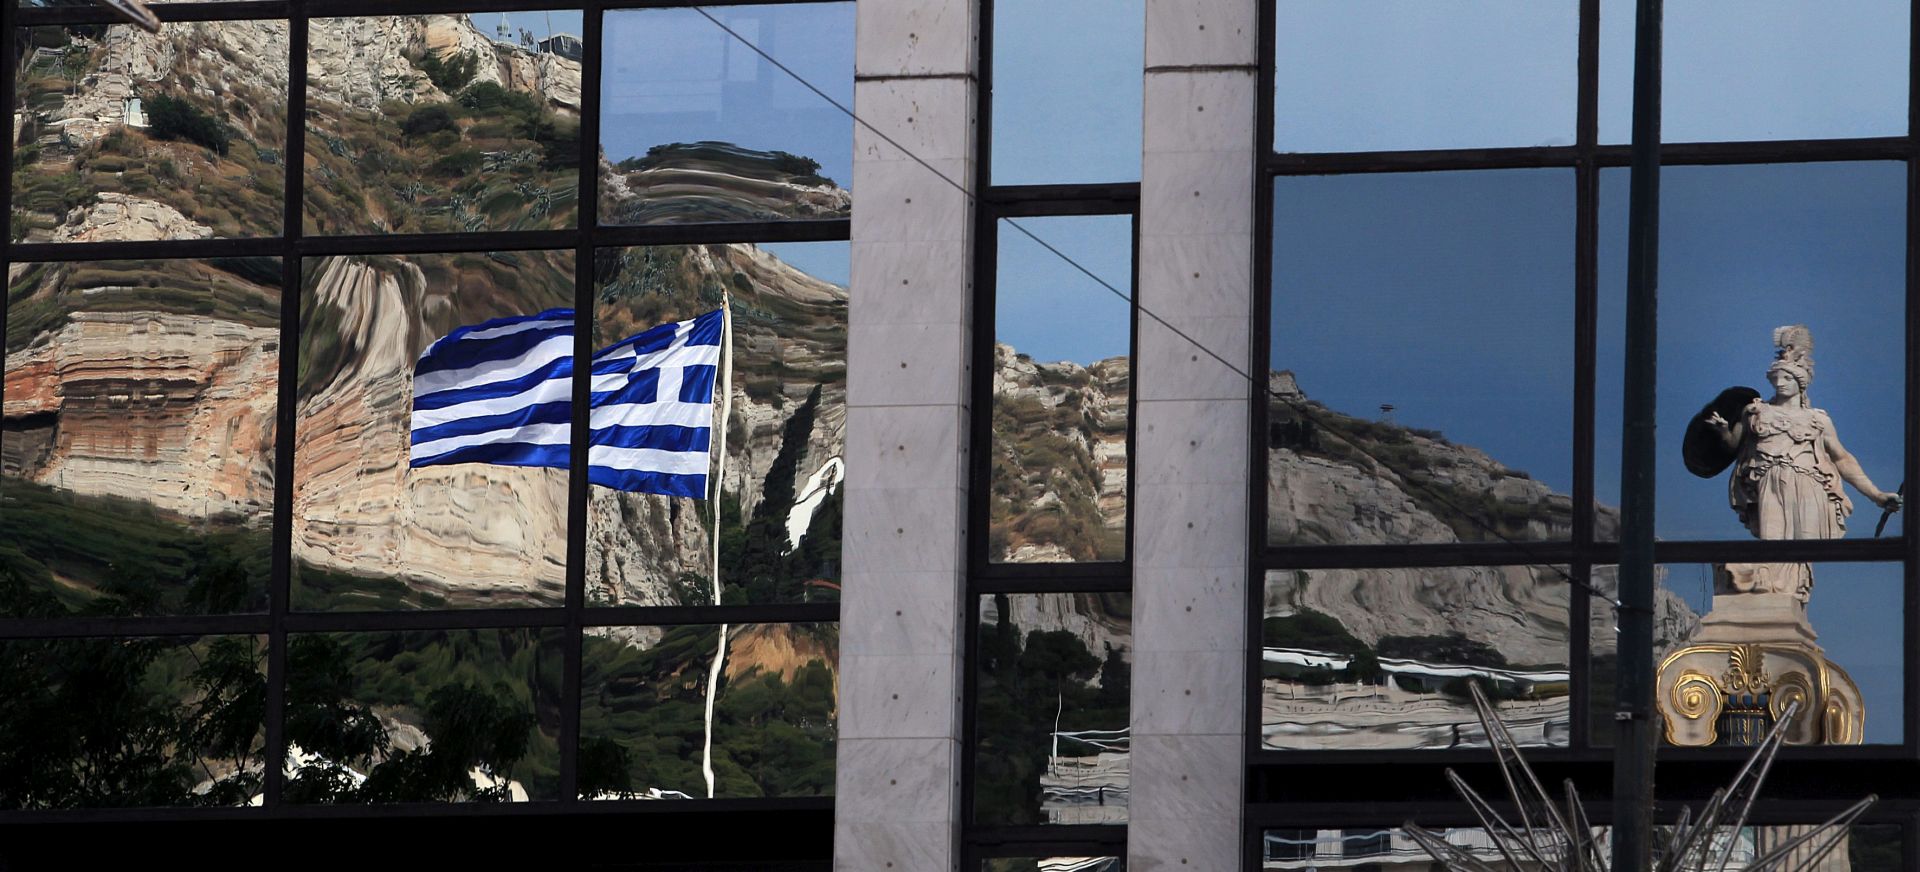 epa04779332 A sculpture of ancient greek goddess Athena and greek flags are reflected on a building in central Athens, Greece, on 01 June 2015. According to reports deliberations on issues regarding the Greek economy continue at the Brussels Group, with some saying a gradual deal on a technical level is considered possible with discussions expected to continue 01 June.  EPA/SIMELA PANTZARTZI